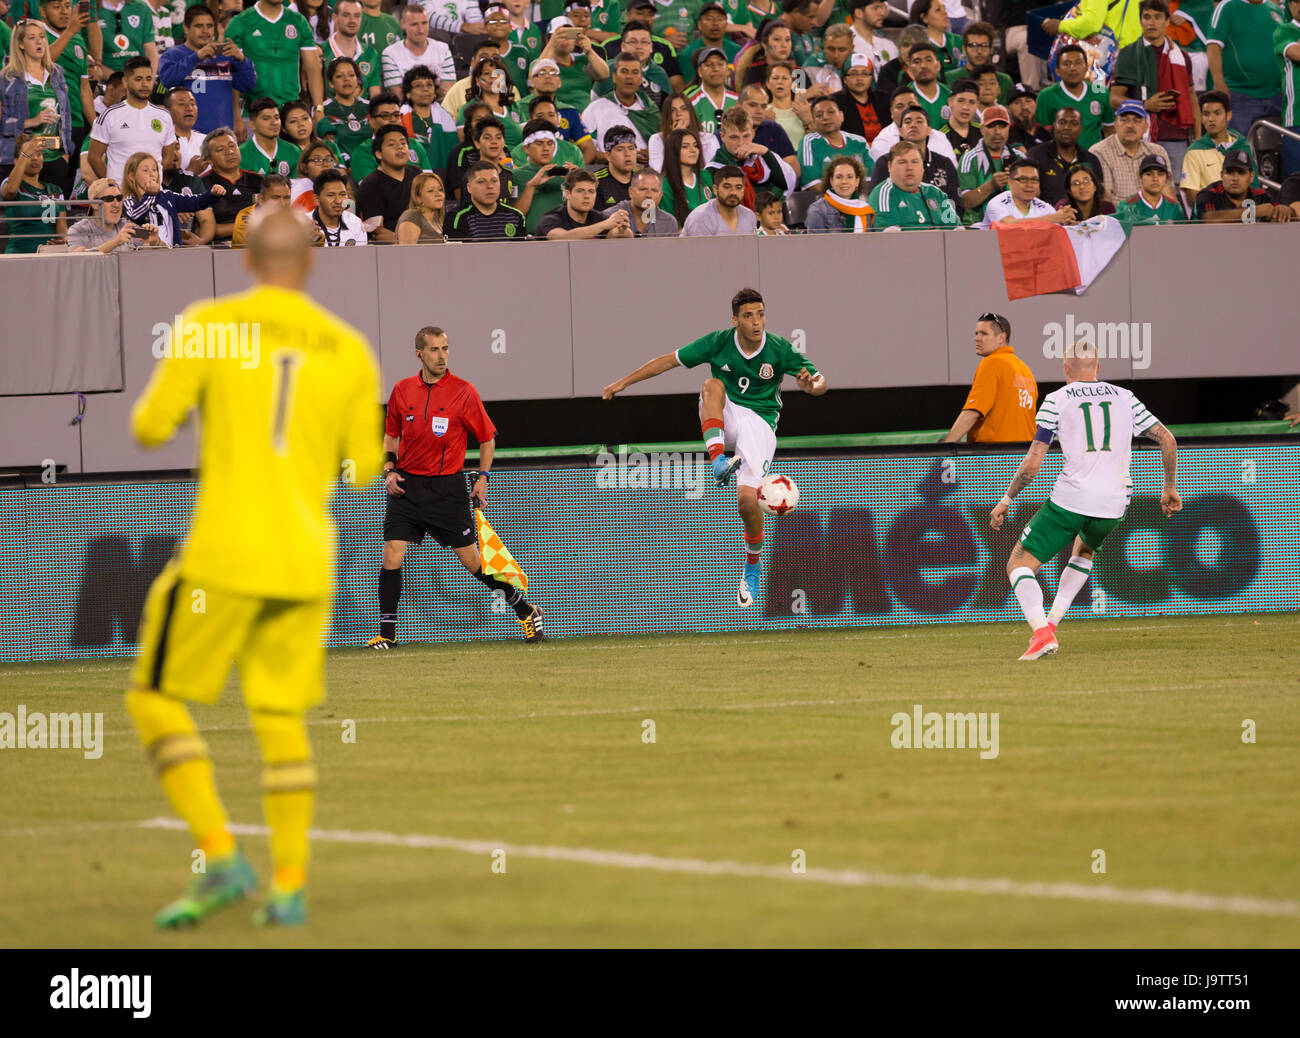 Meadowlands, NJ USA - June 1, 2017: Raul Jimenez (9) of Mexico controls ball during friendly game against Republic of Ireland at MetLife arena in Meadowlands, Mexico won 3 - 1 Stock Photo